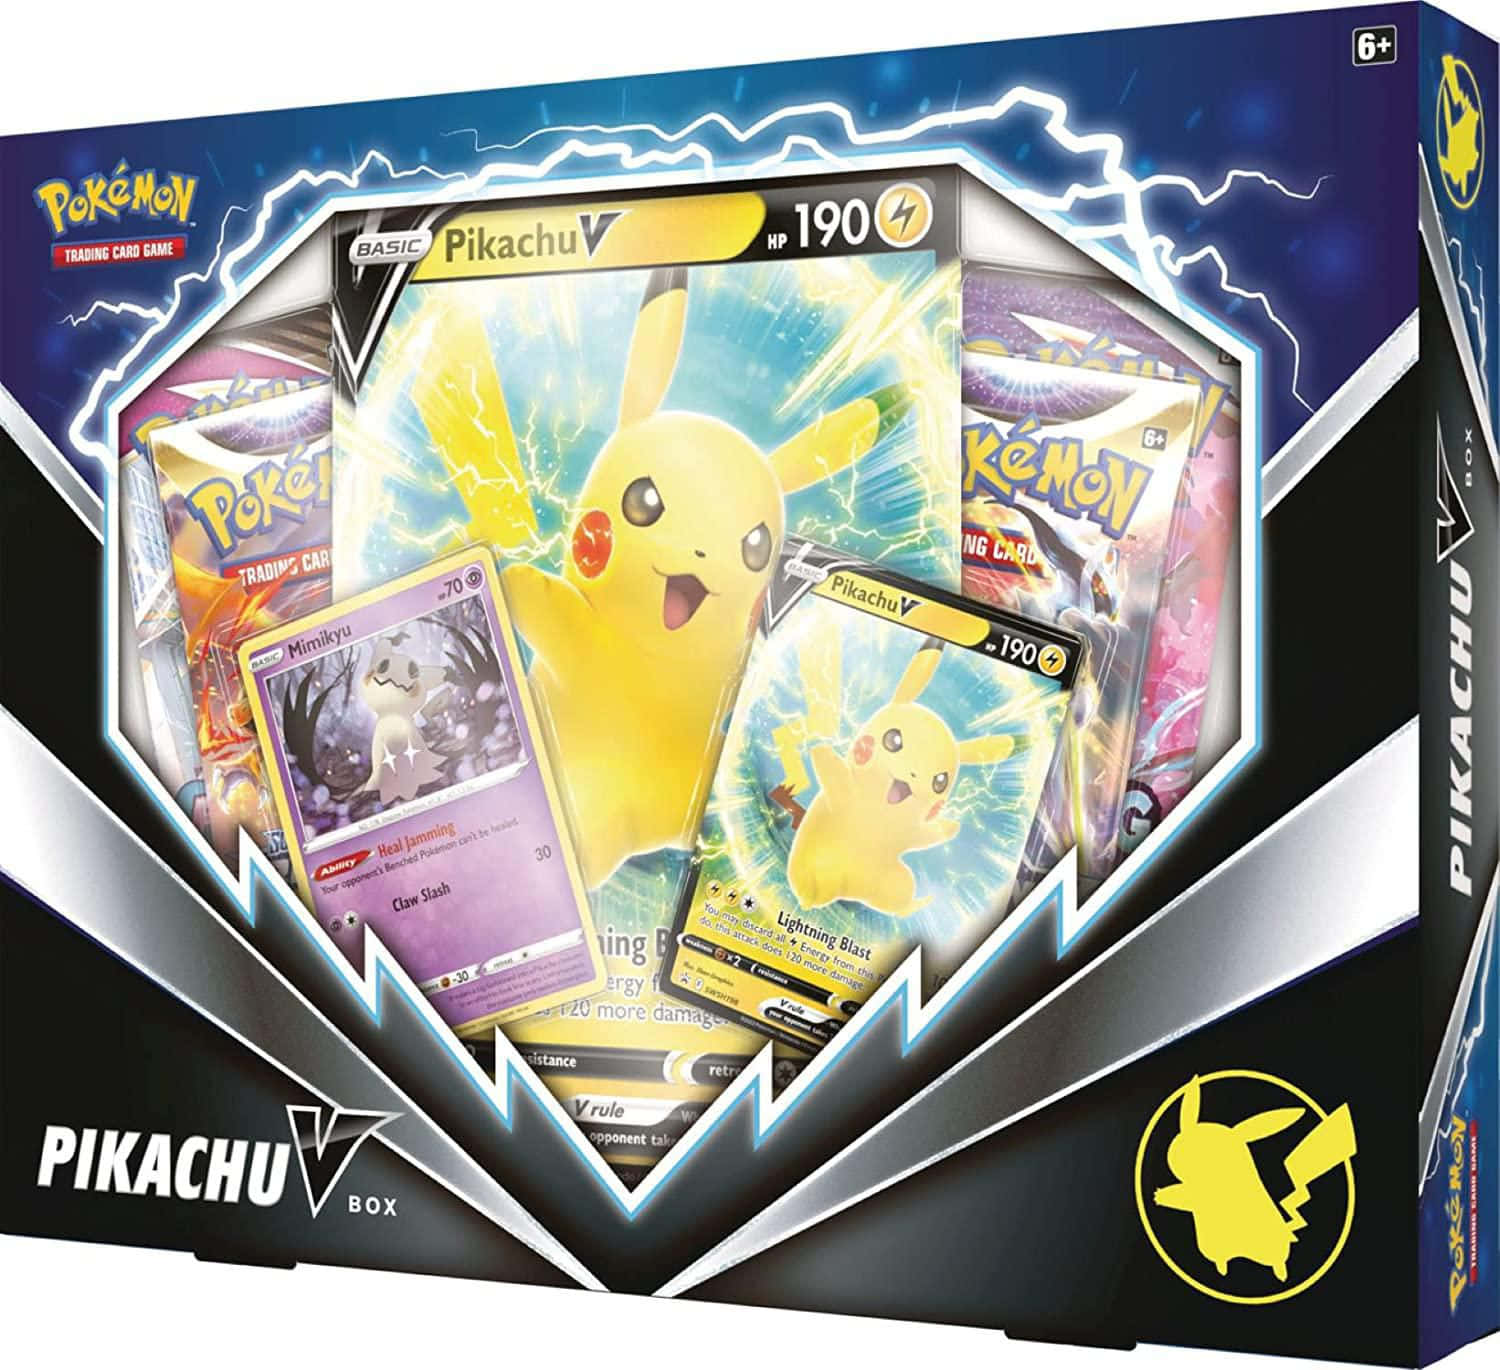 Get your own Pokemon card now for a delightful gaming experience